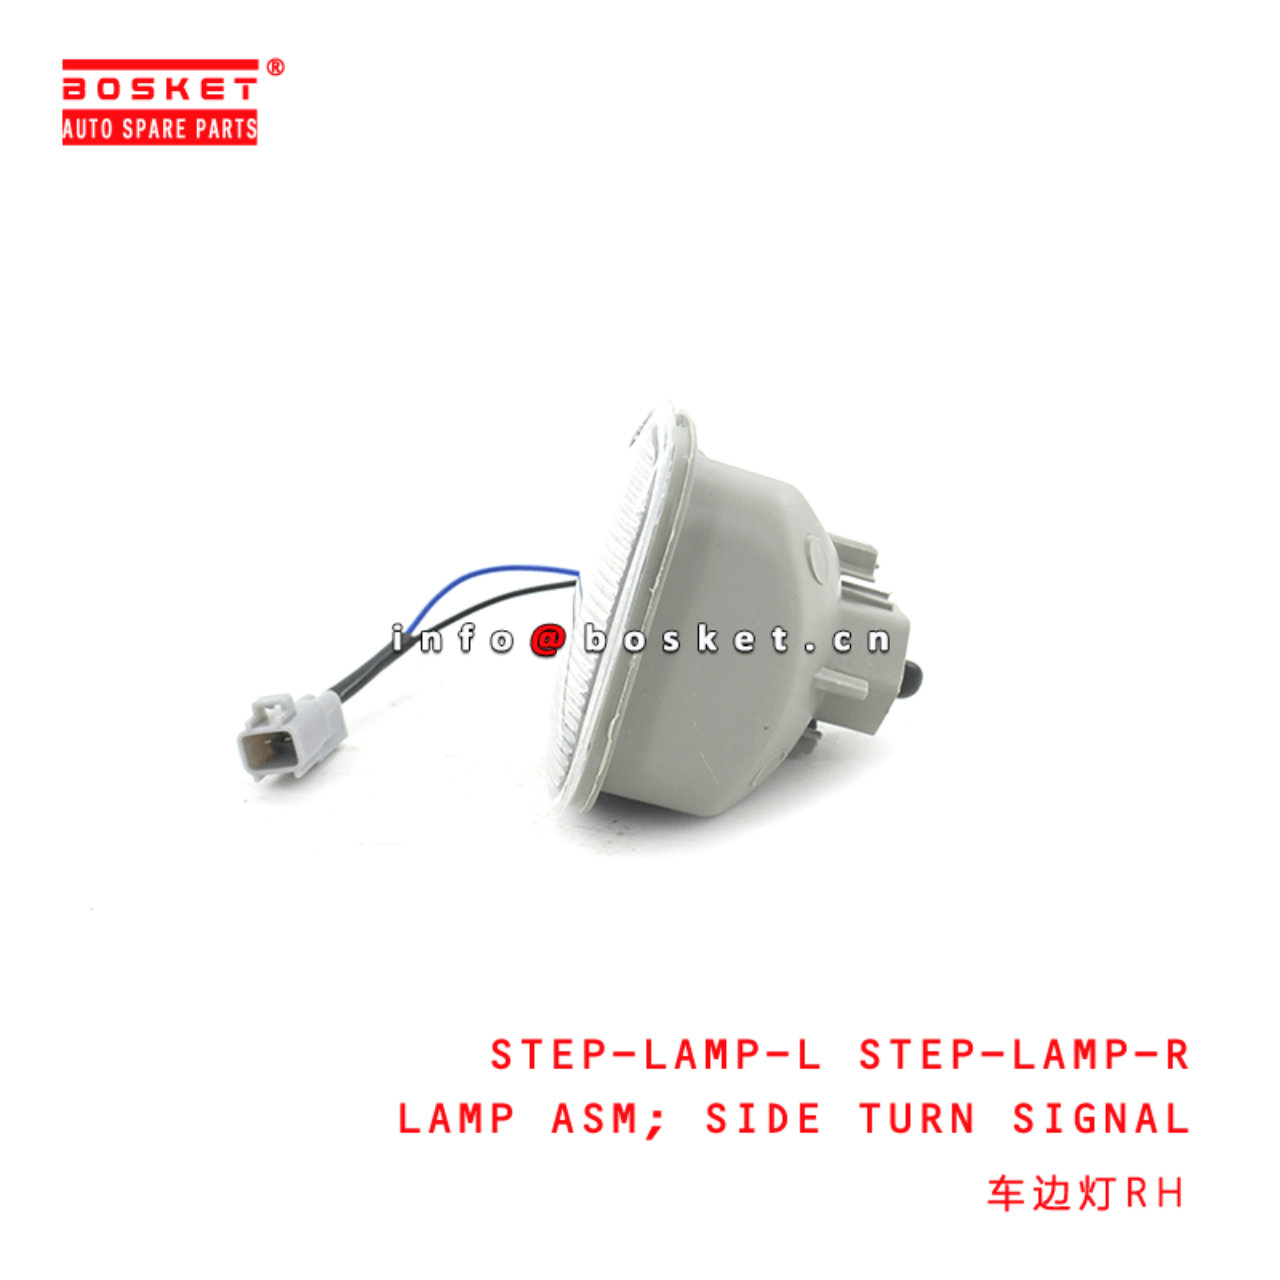 STEP-LAMP-L STEP-LAMP-R STEPLAMPL STEPLAMPR Side Turn Signal Lamp Assembly Suitable for ISUZU 